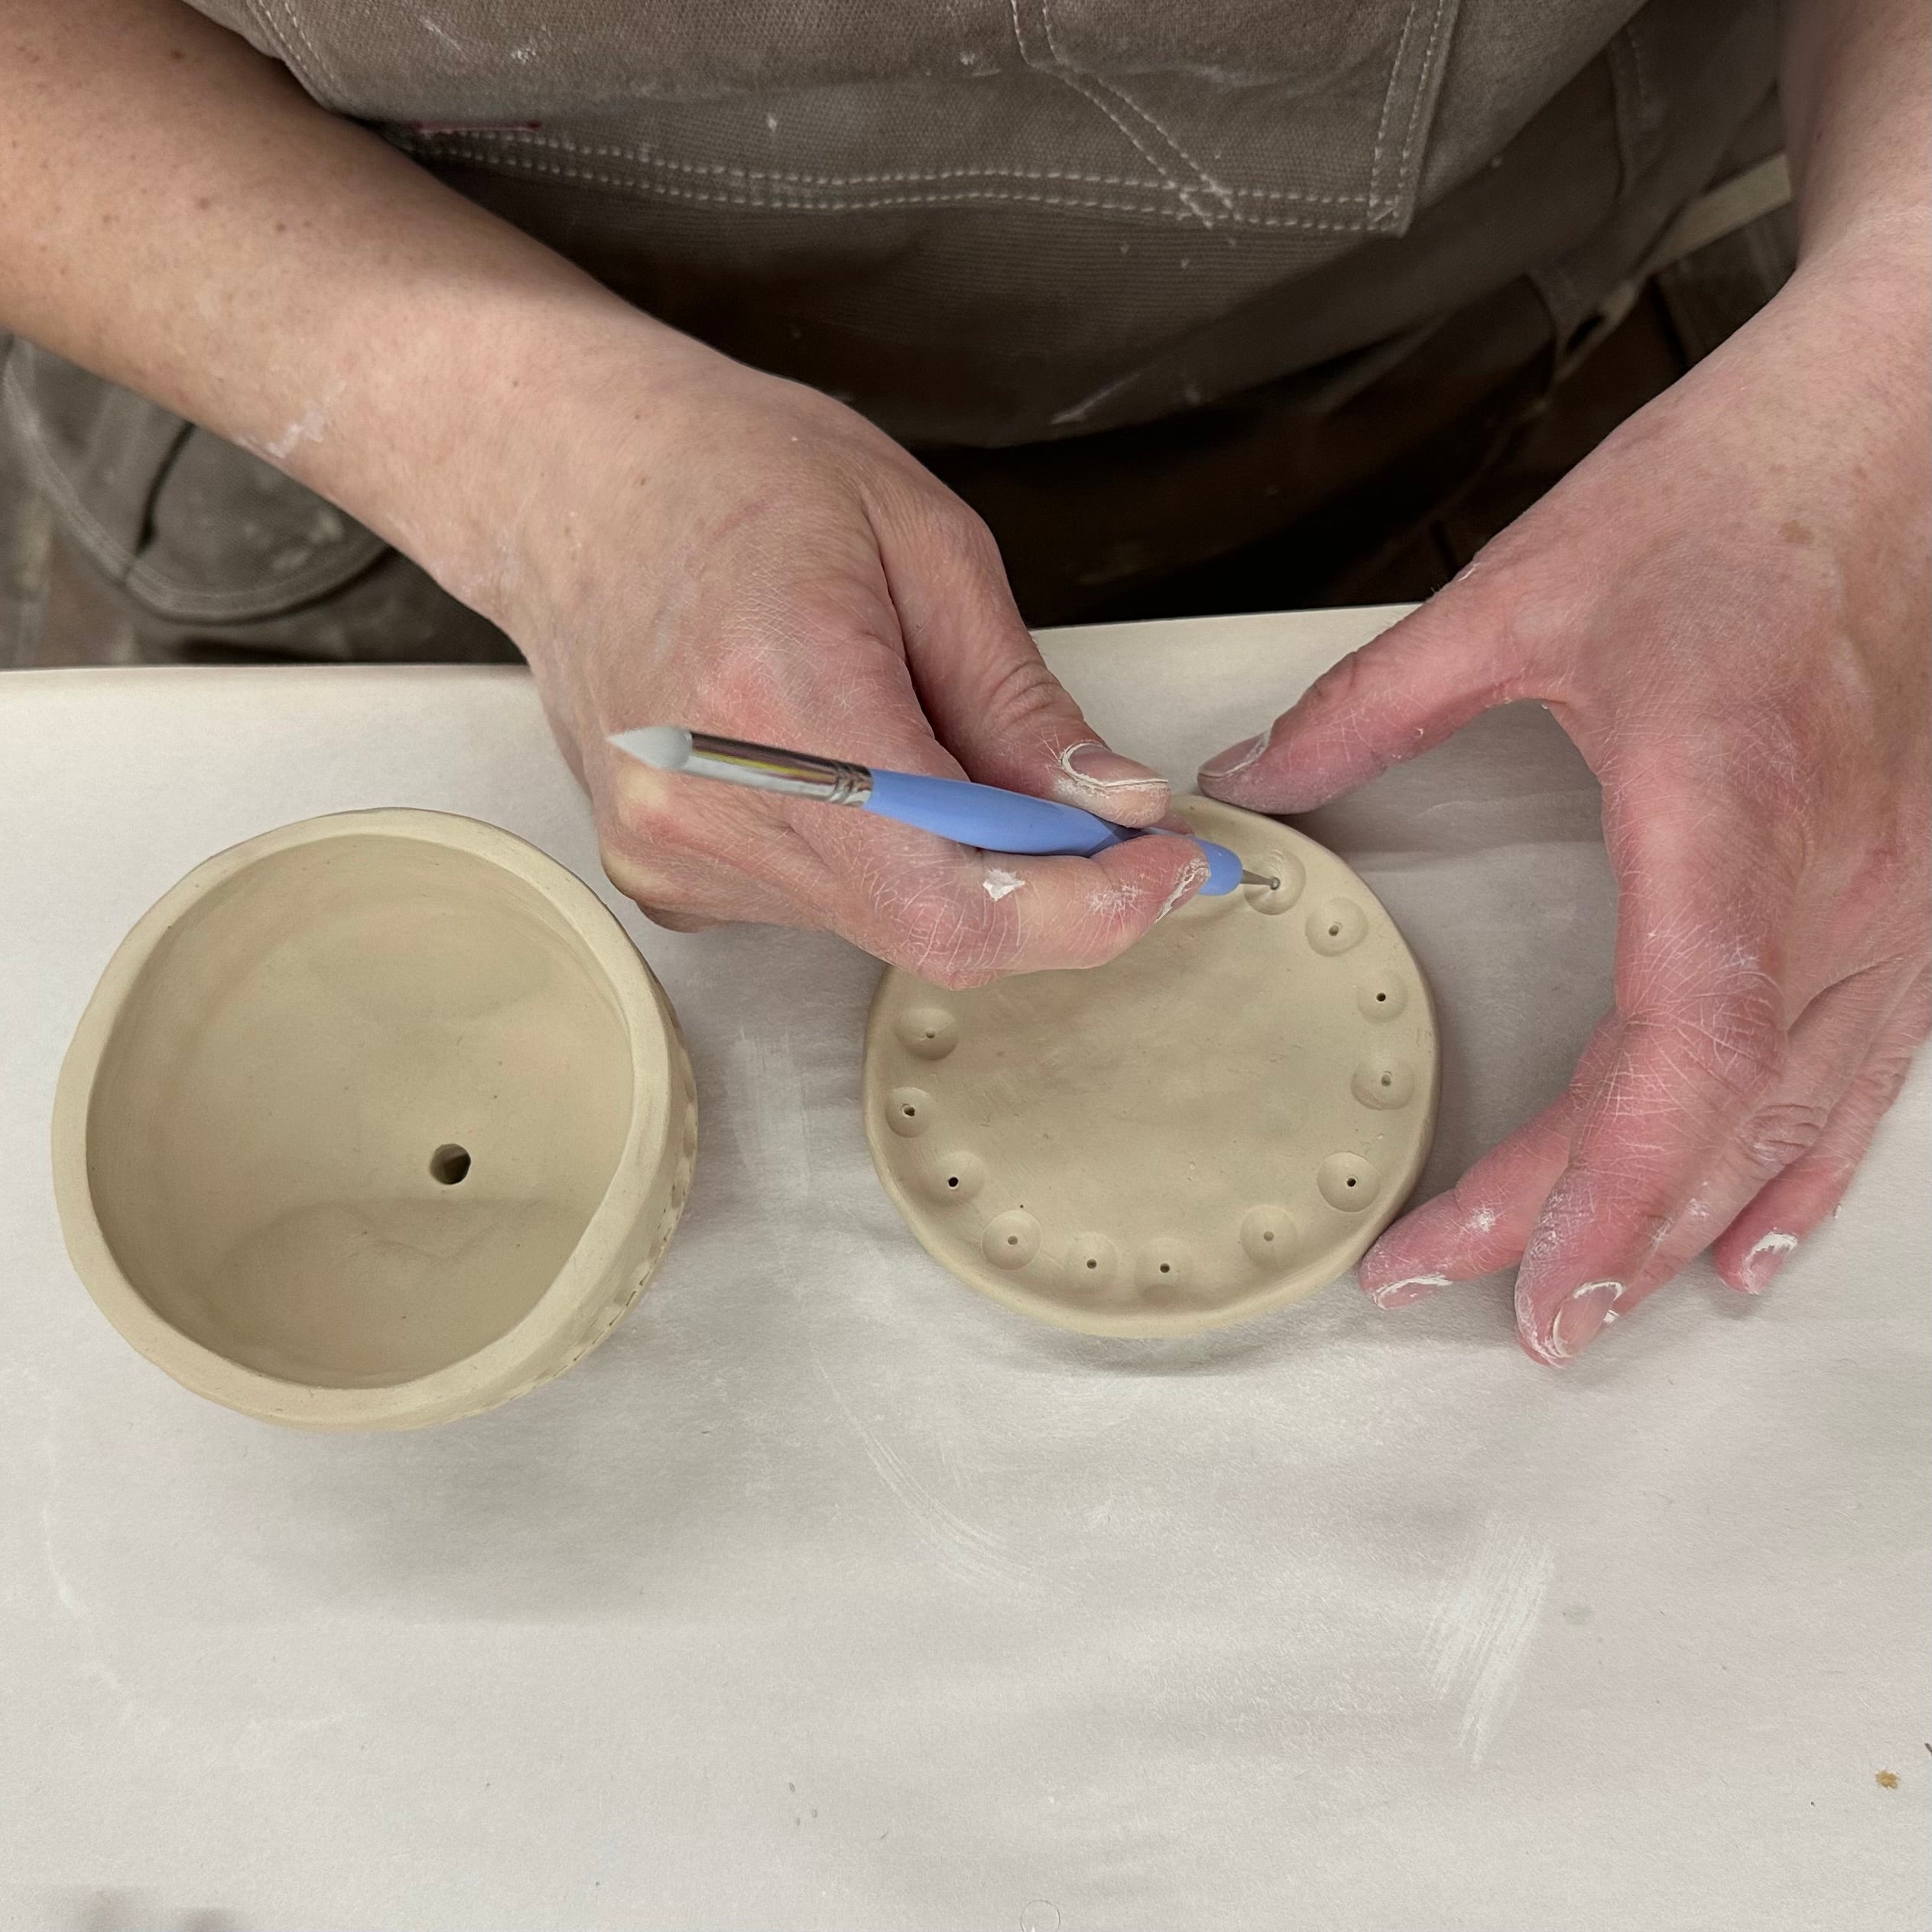 Tuesday, April 23, 6-8PM Adult (16+) Pinch Pot Planter Workshop at Bethany Jay Art: The Home Studio